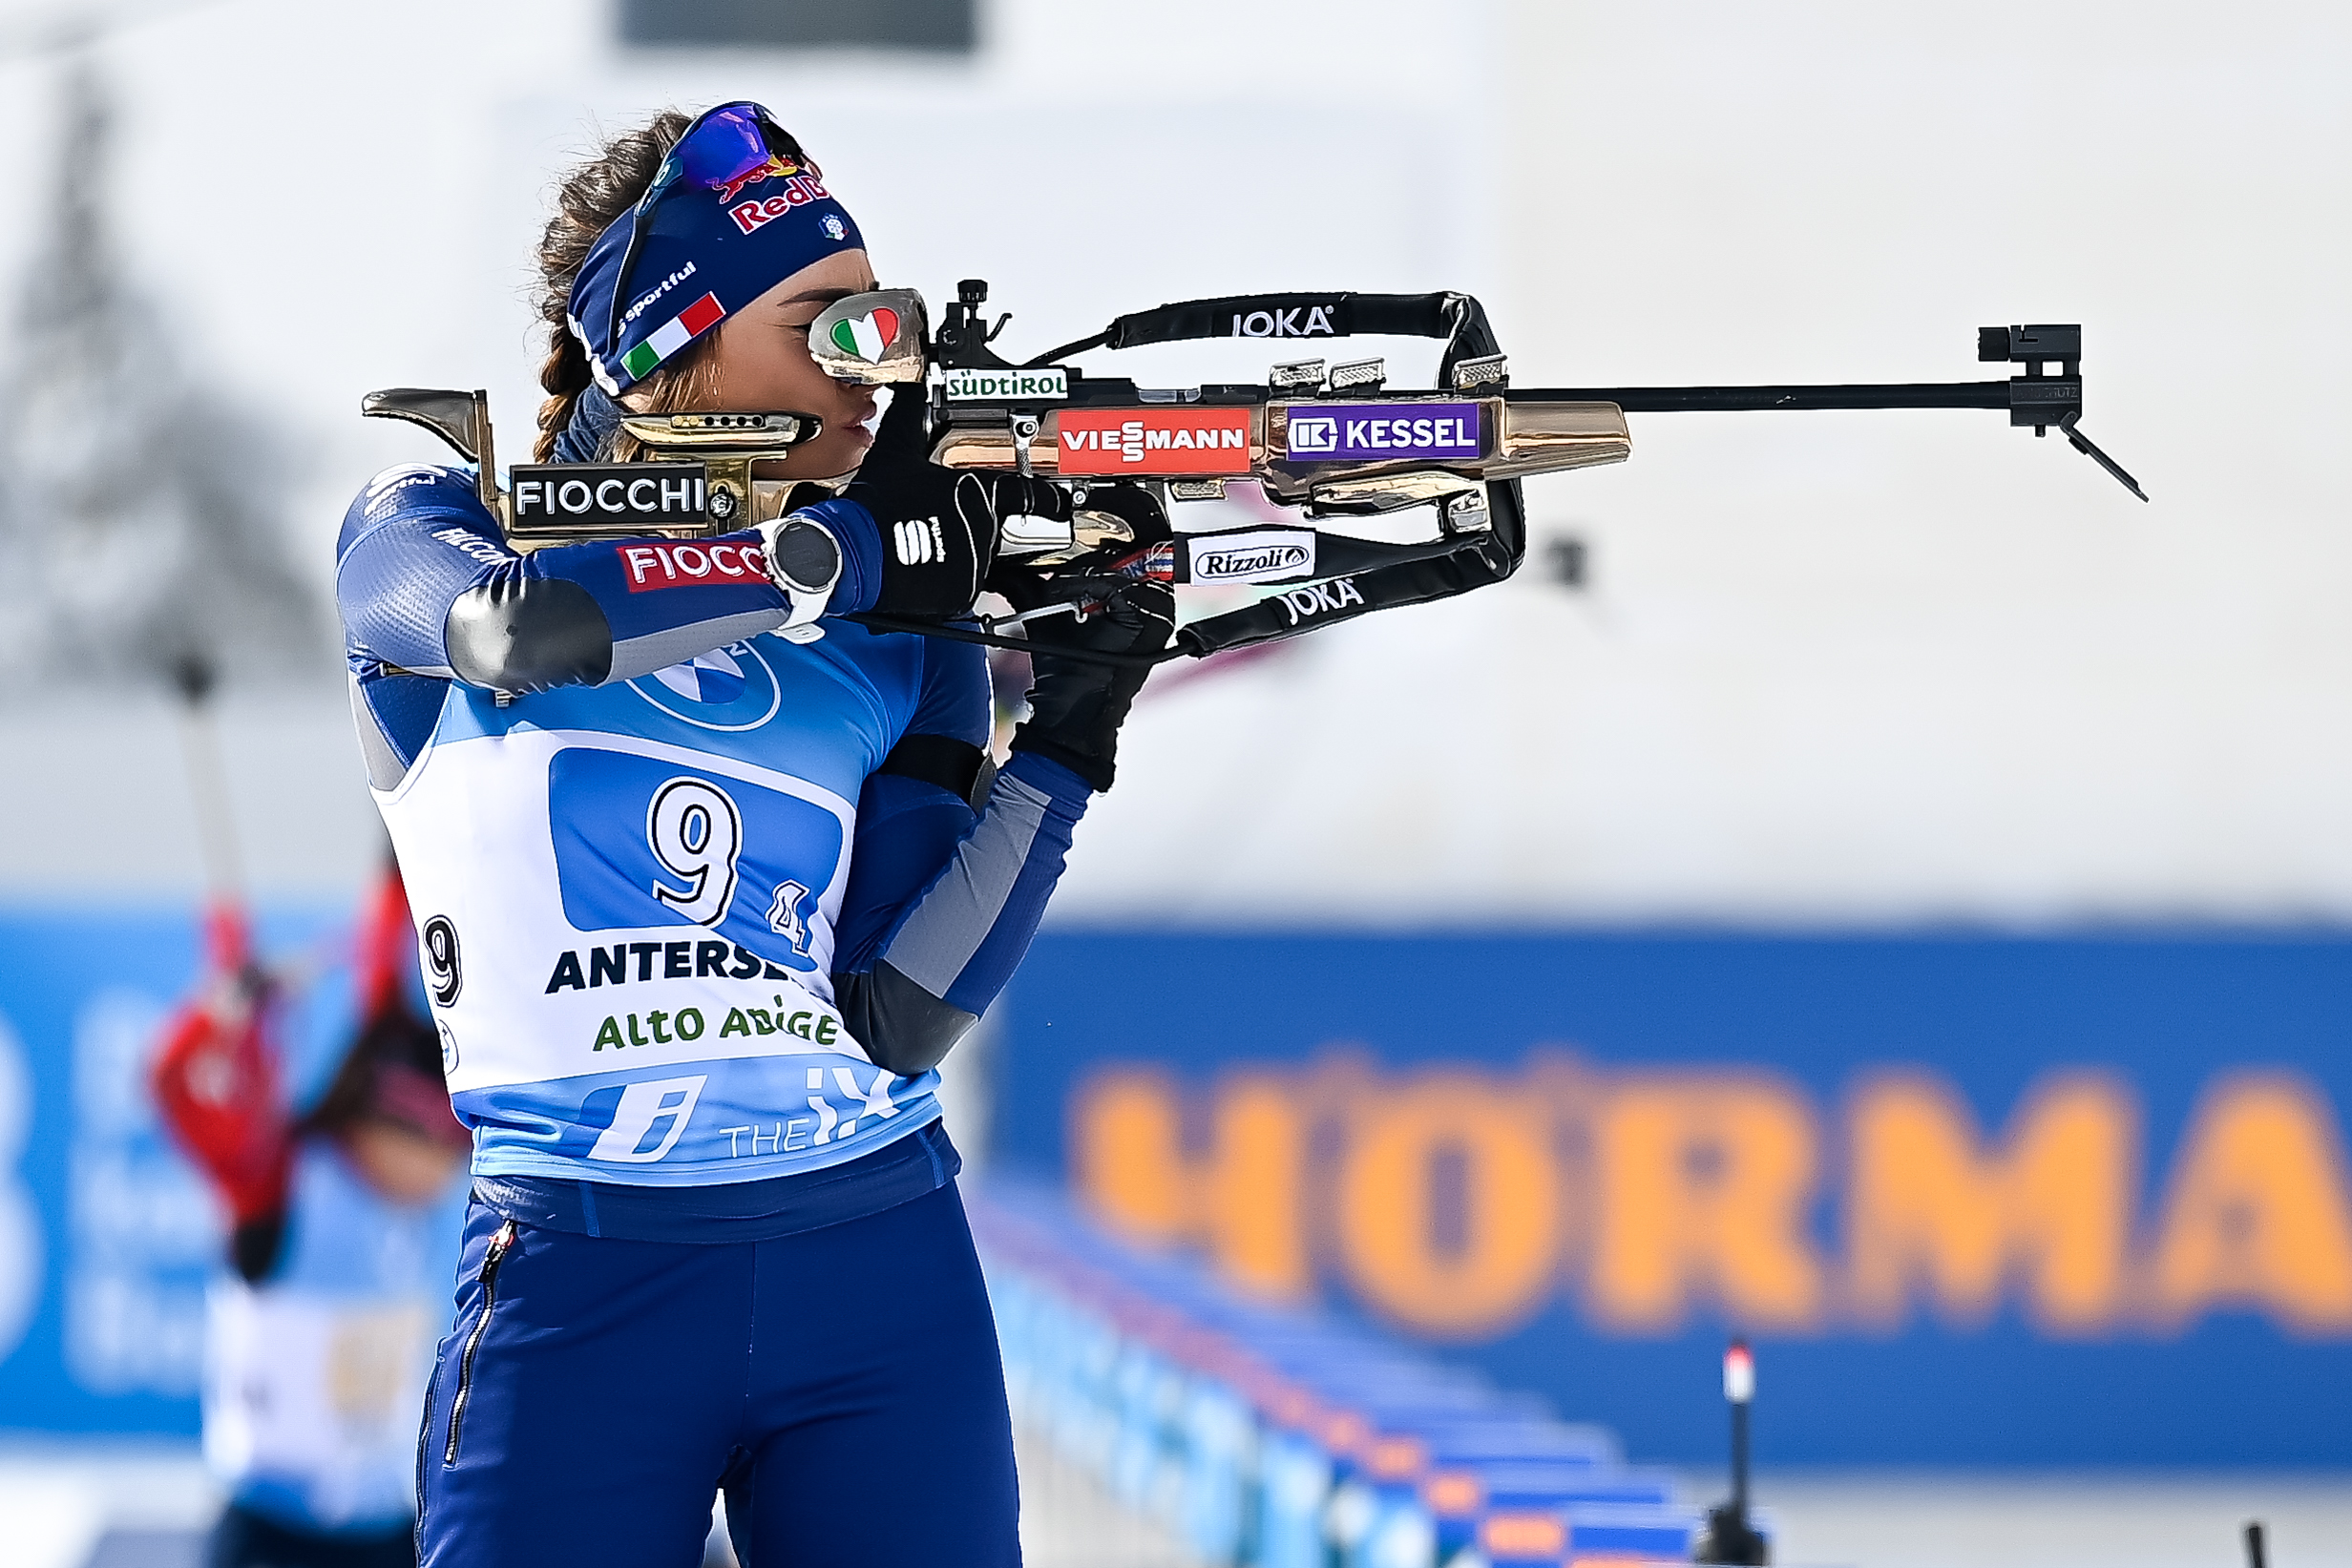 BIATHLON. FIOCCHI STILL TOGETHER WITH THE ITALIAN NATIONAL TEAM